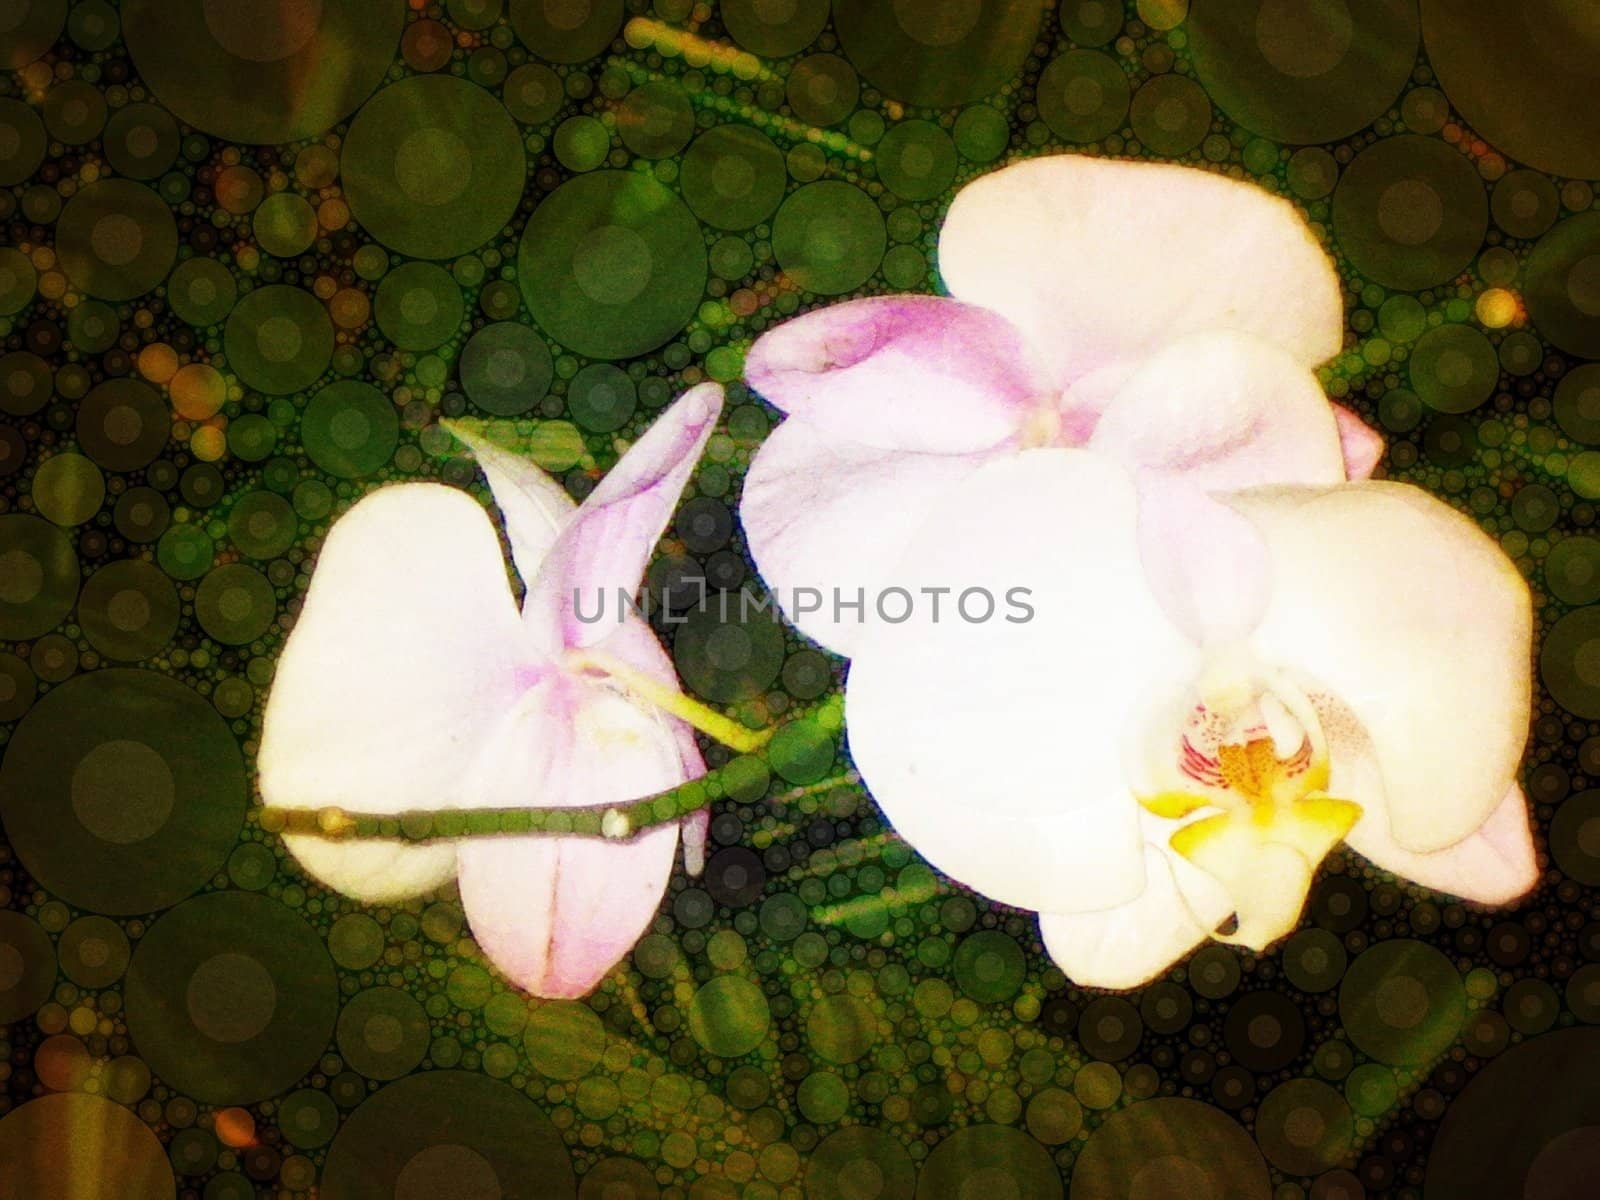 Orchid blooms edited